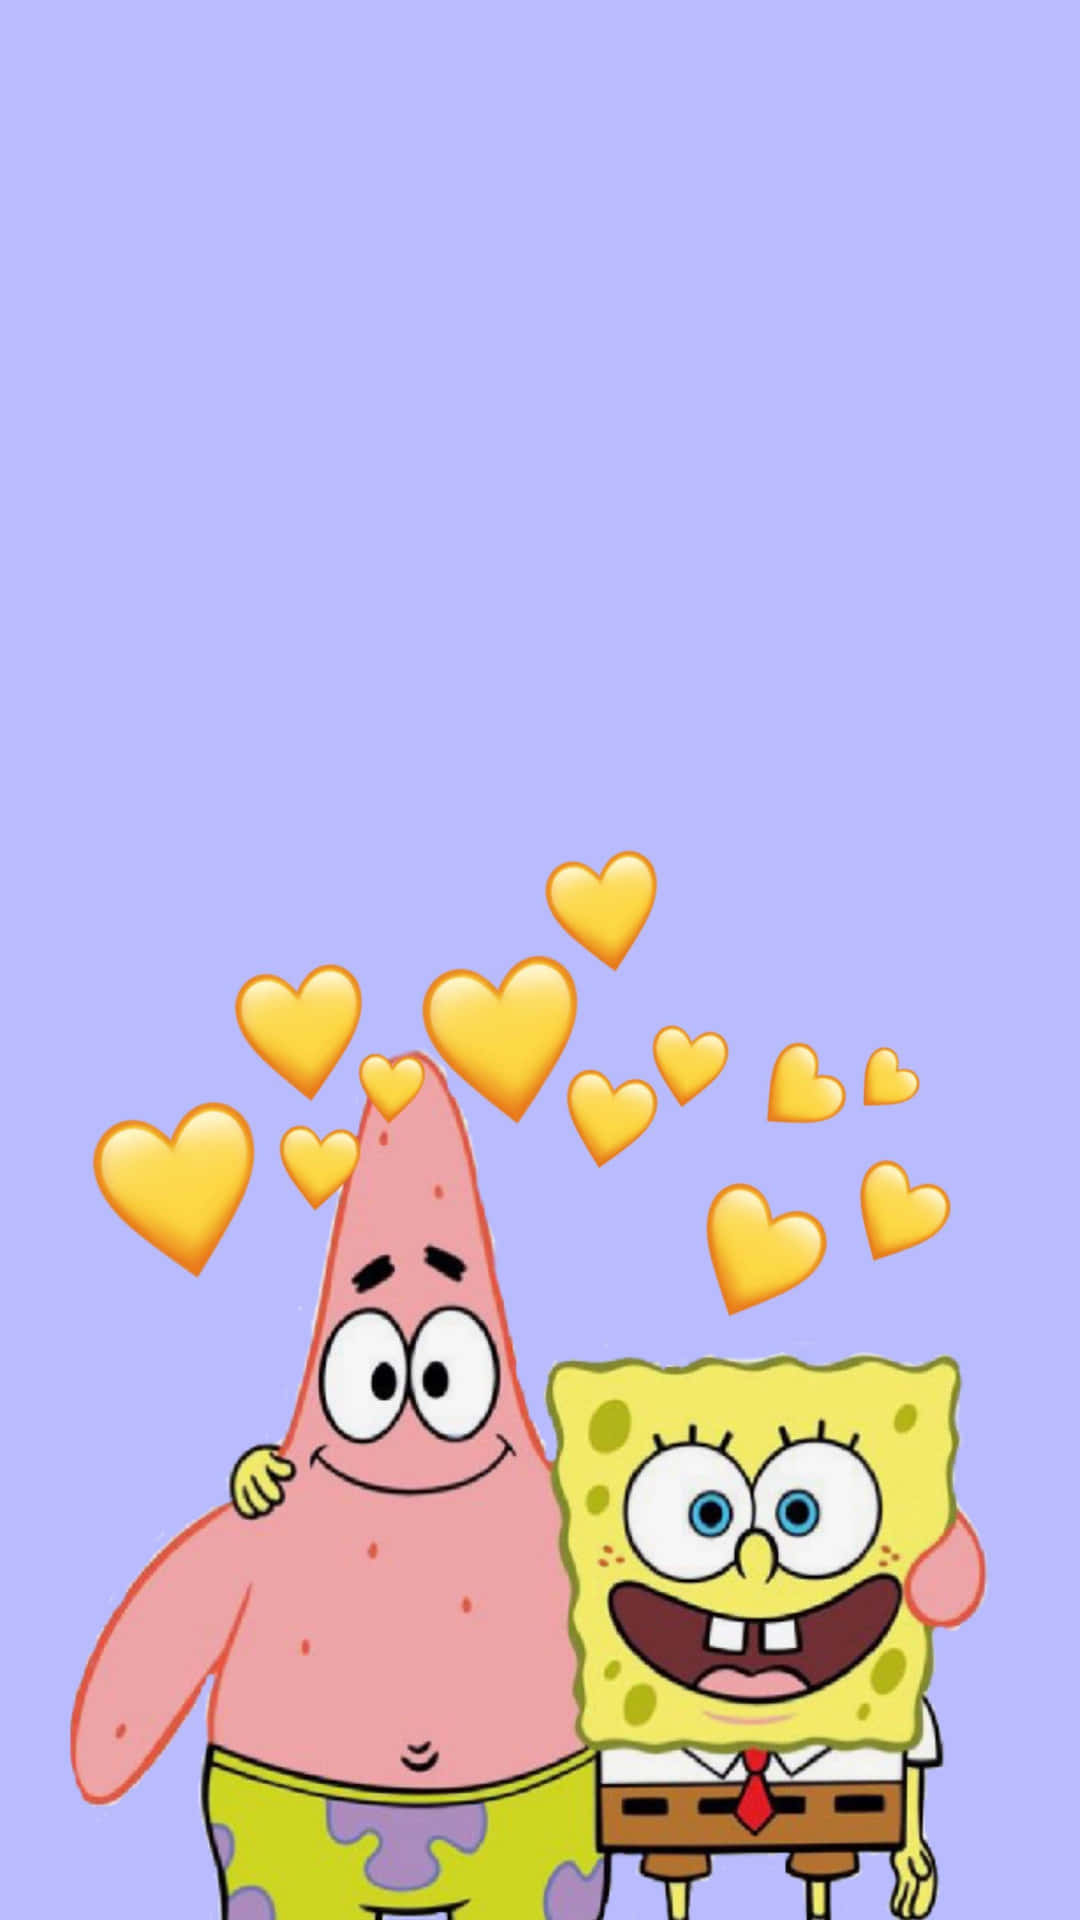 Aesthetic SpongeBob And Patrick With Yellow Hearts Wallpaper